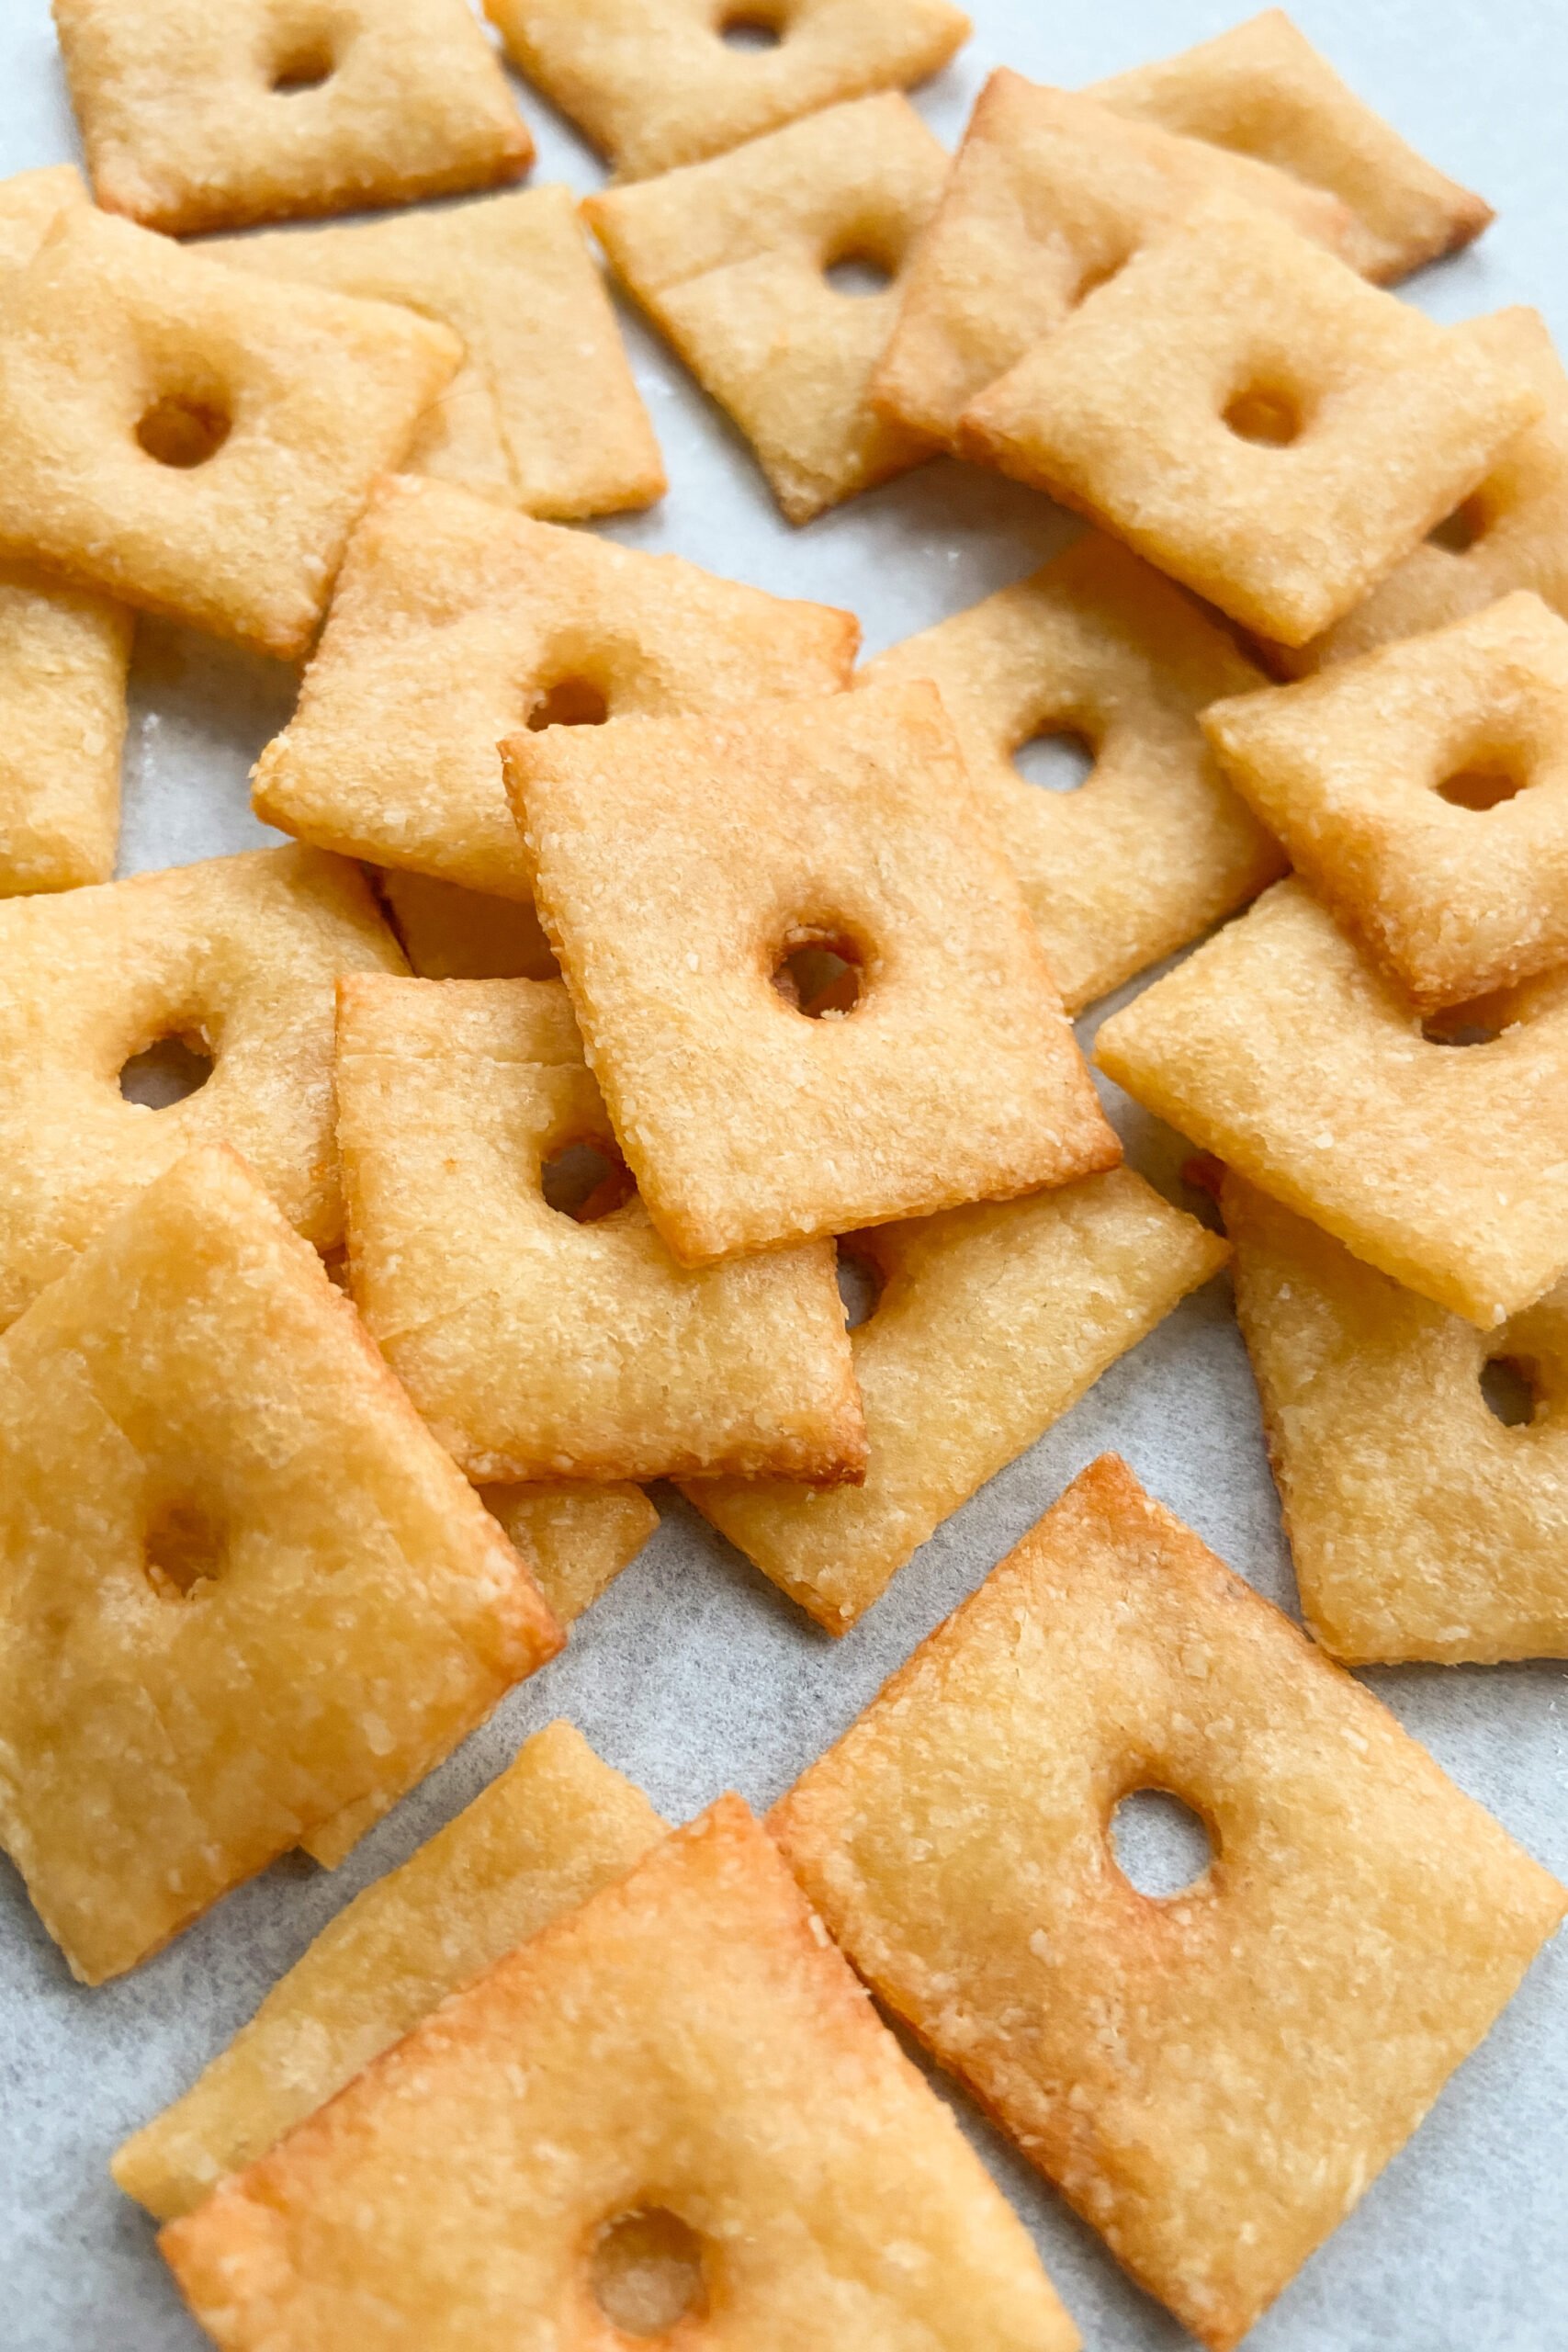 Homemade cheez-it crackers fresh out of the oven